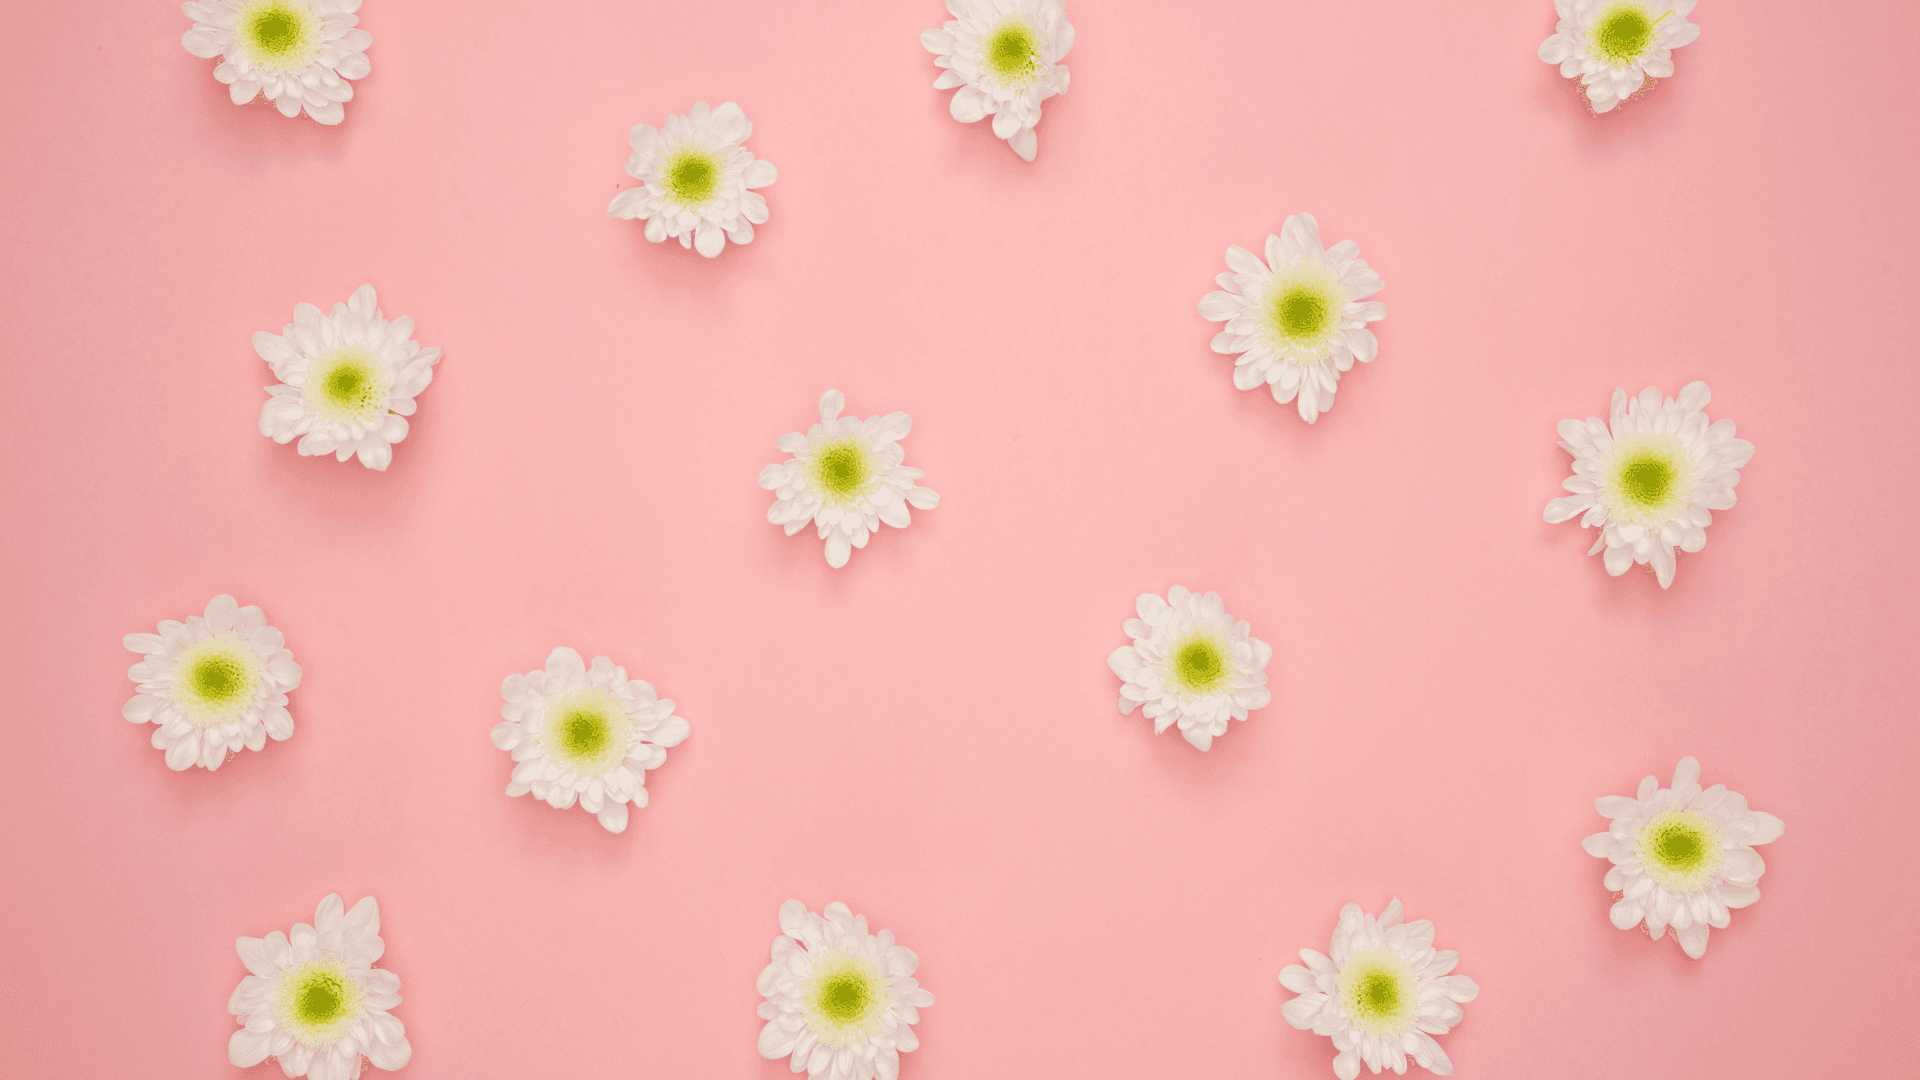 White Daisies On A Pink Background